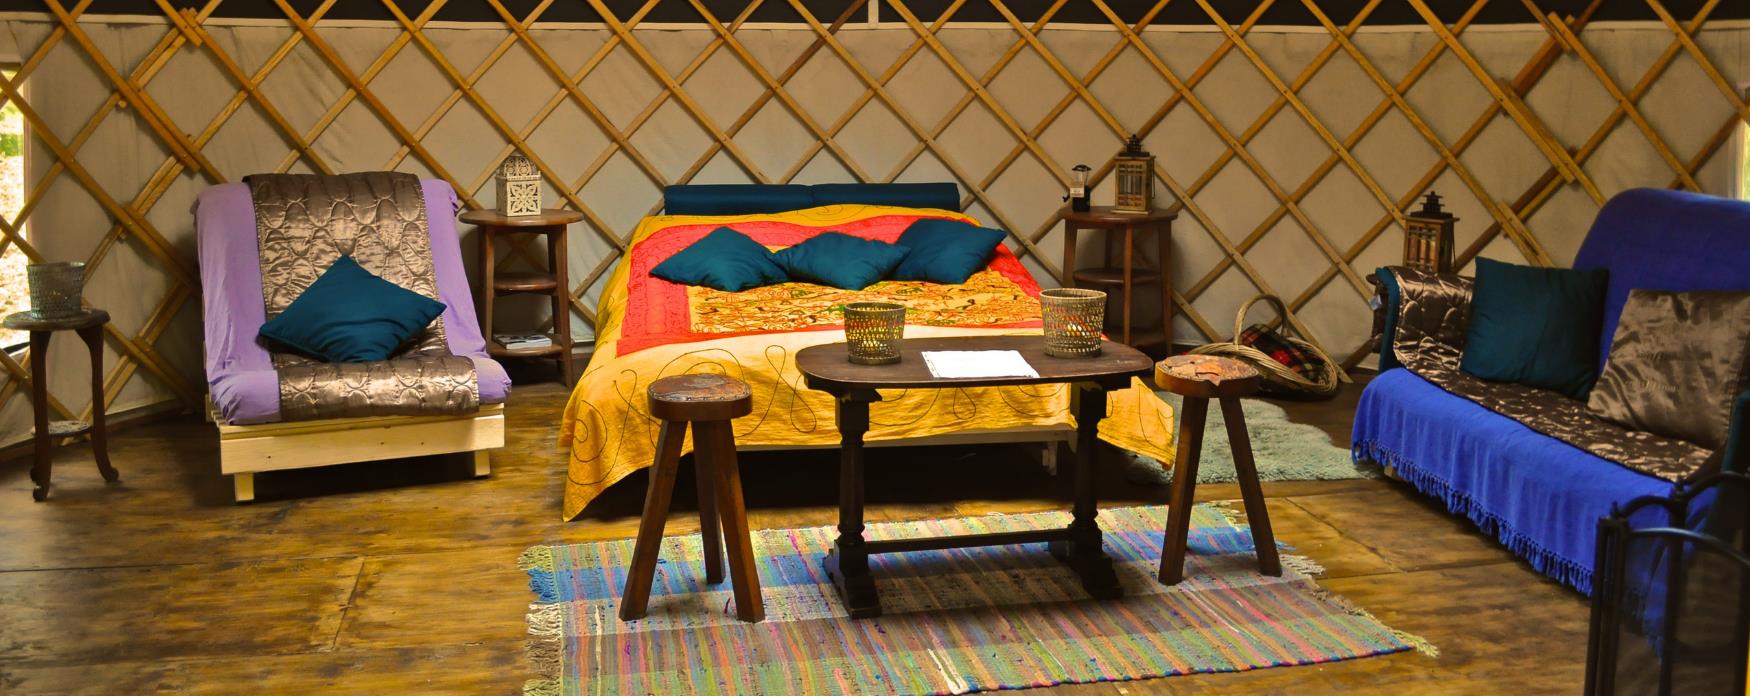 inside of yurt with plush blue sofa and gold accessories